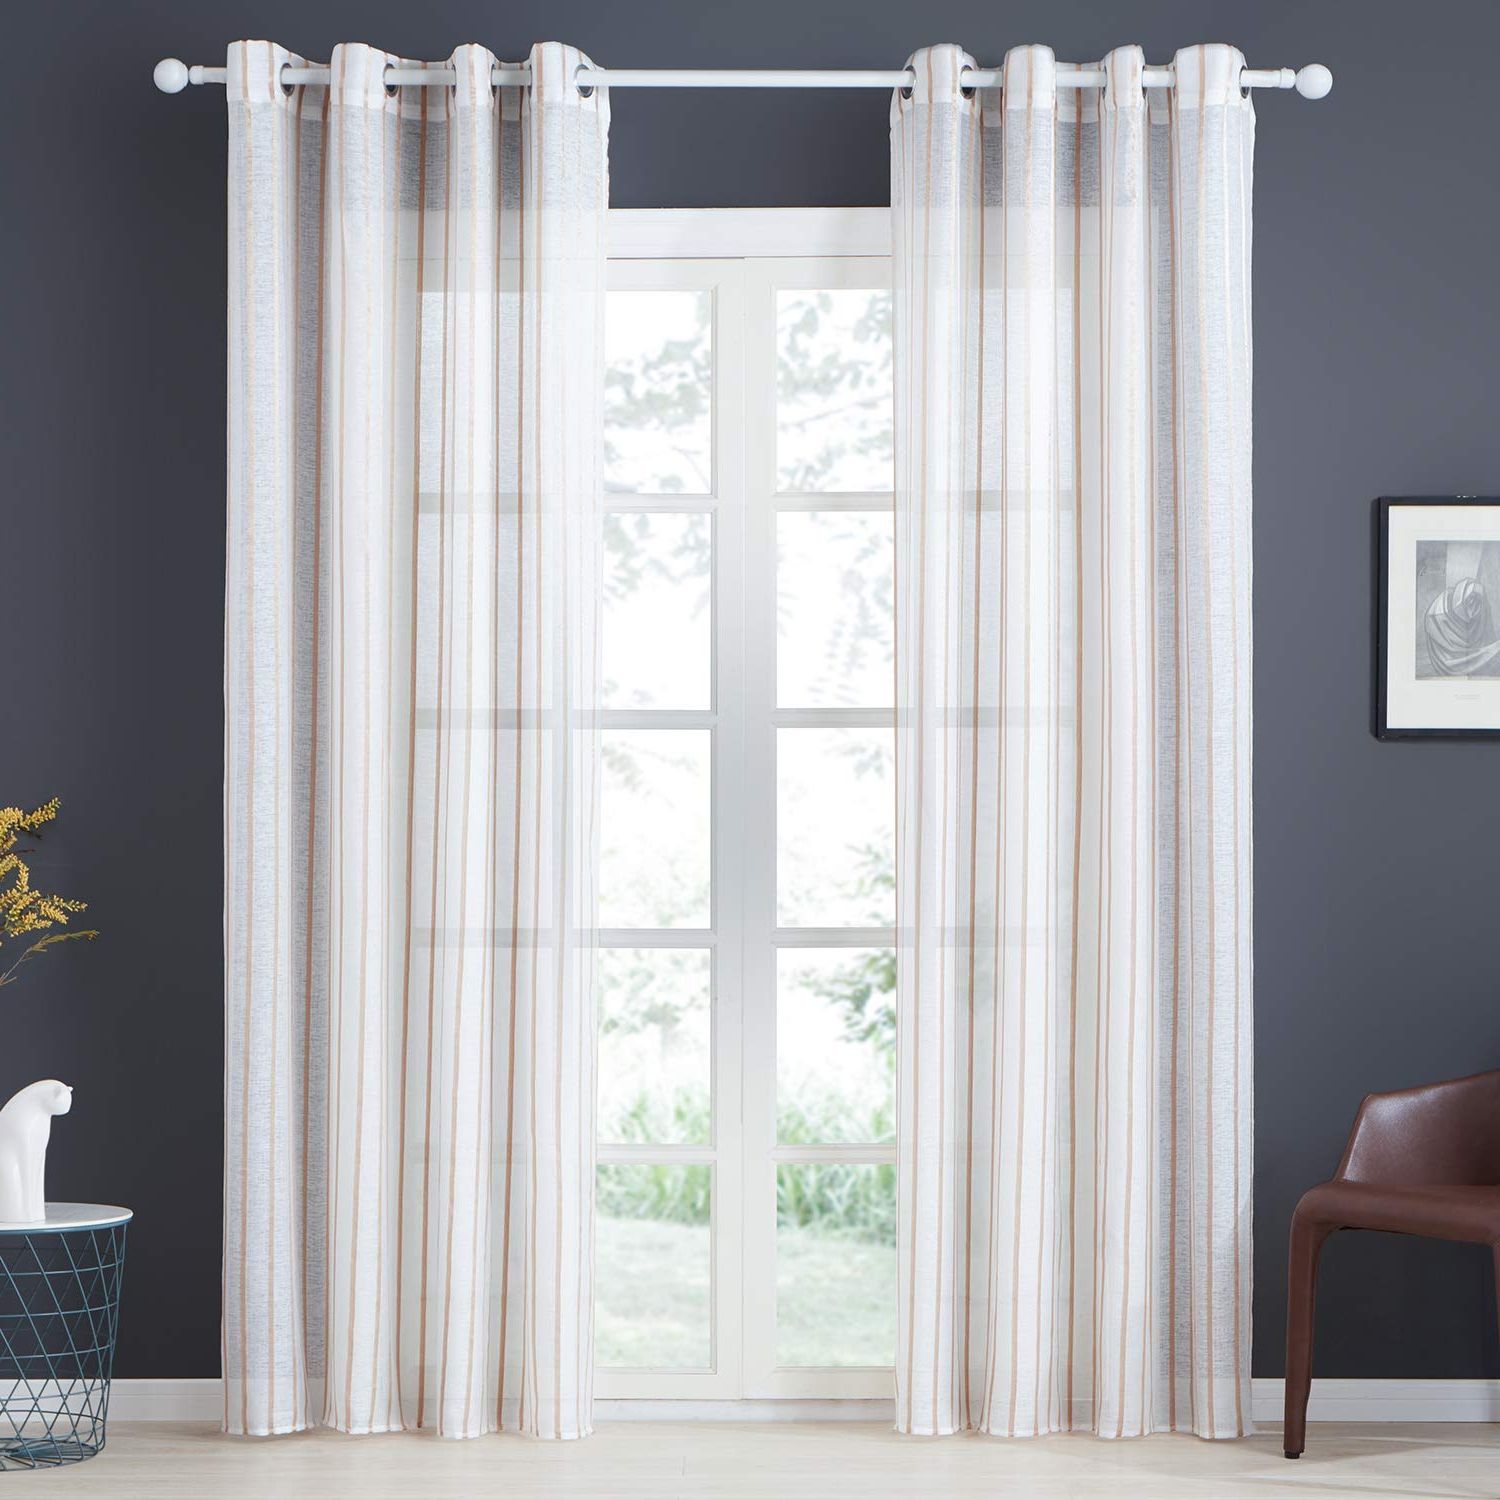 Fashionable Ombre Stripe Yarn Dyed Cotton Window Curtain Panel Pairs Within Topfinel Semi Voile Curtains Eyelet Ring Top Yarn Dyed Net Sheer Curtains  Vertical Stripe Design Window Treatments For Living Room Bedroom 54x (View 14 of 20)